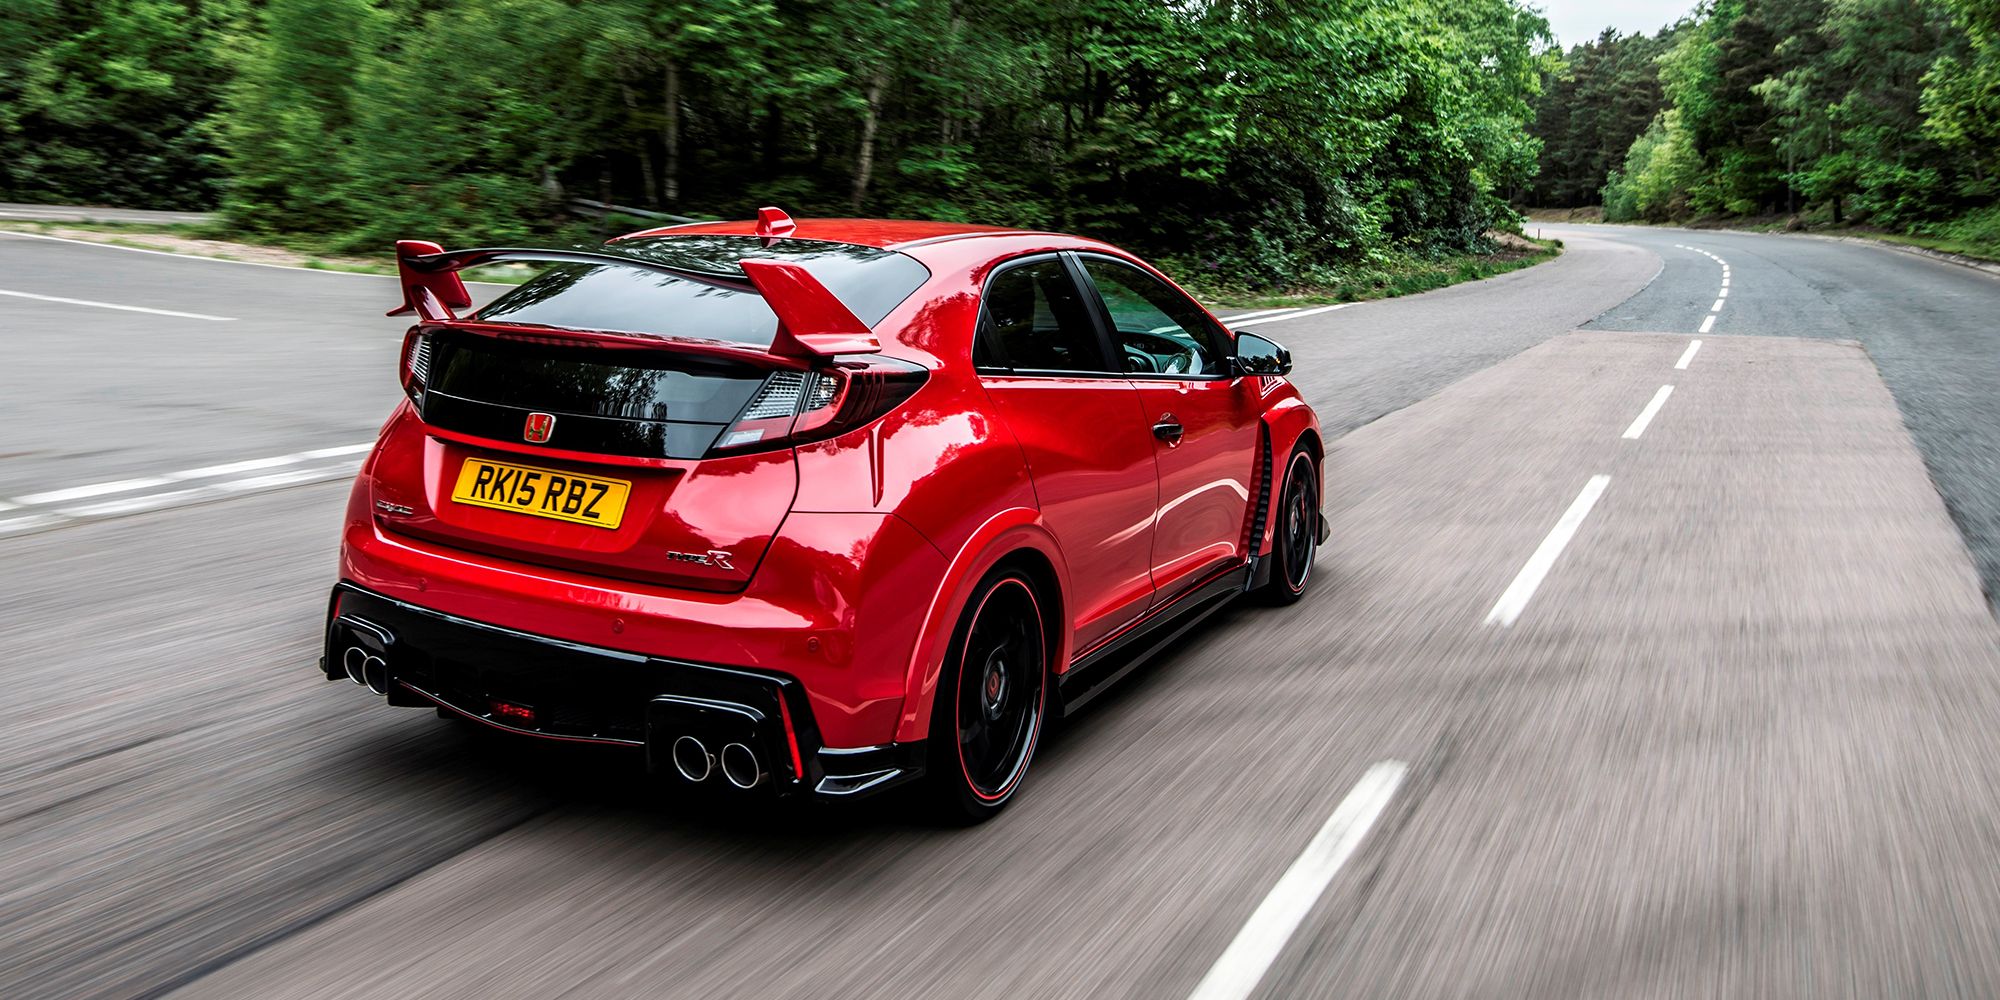 The rear of the FK2 Civic Type R